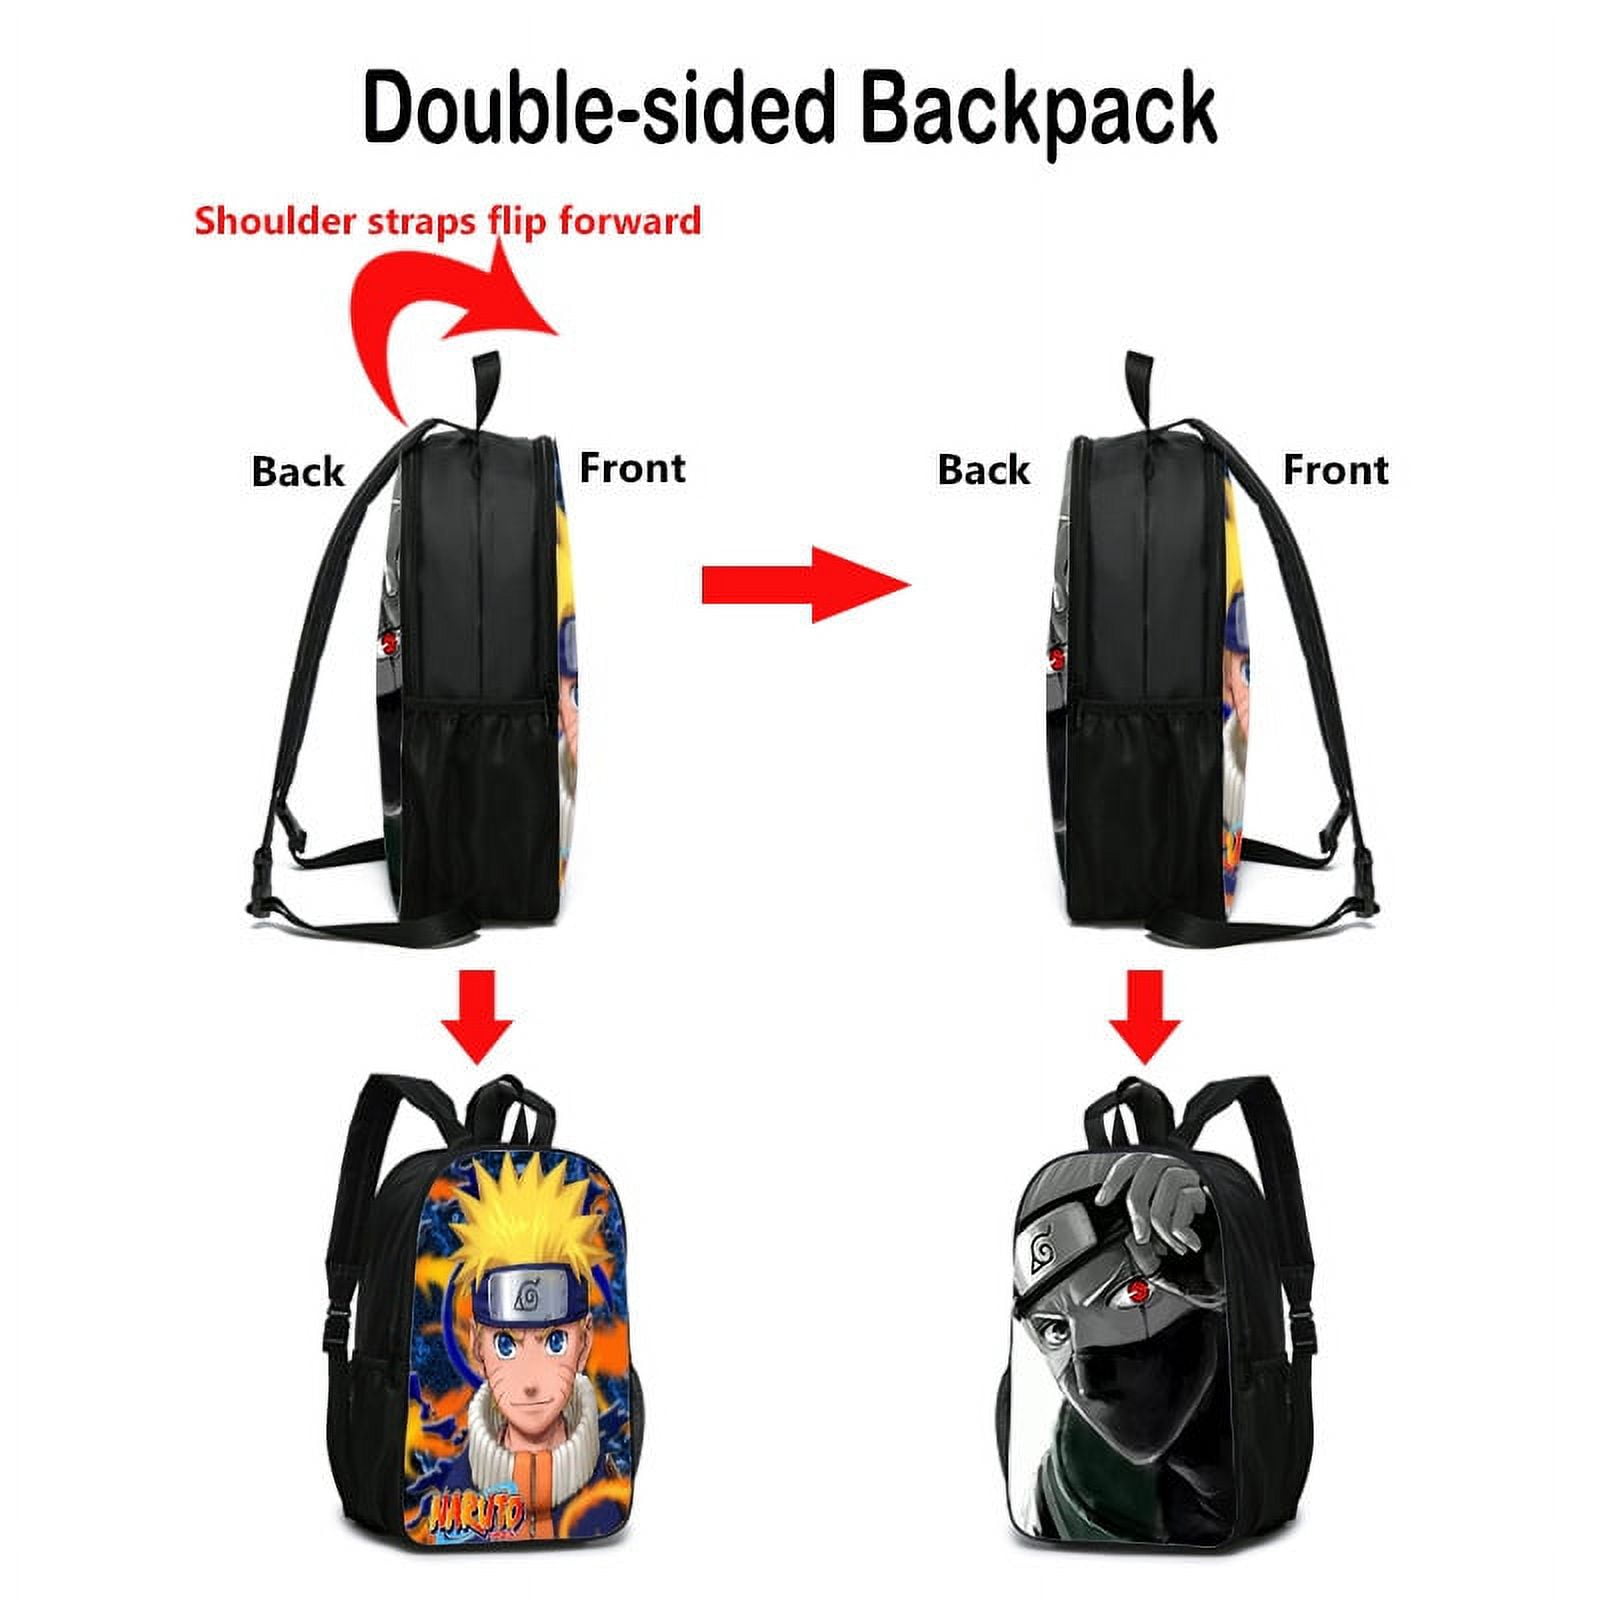 Naruto Backpack Cartoon Anime Casual Elementary and Middle School Student  School Bag Children Backpack Shoulder Bag Computer Bag